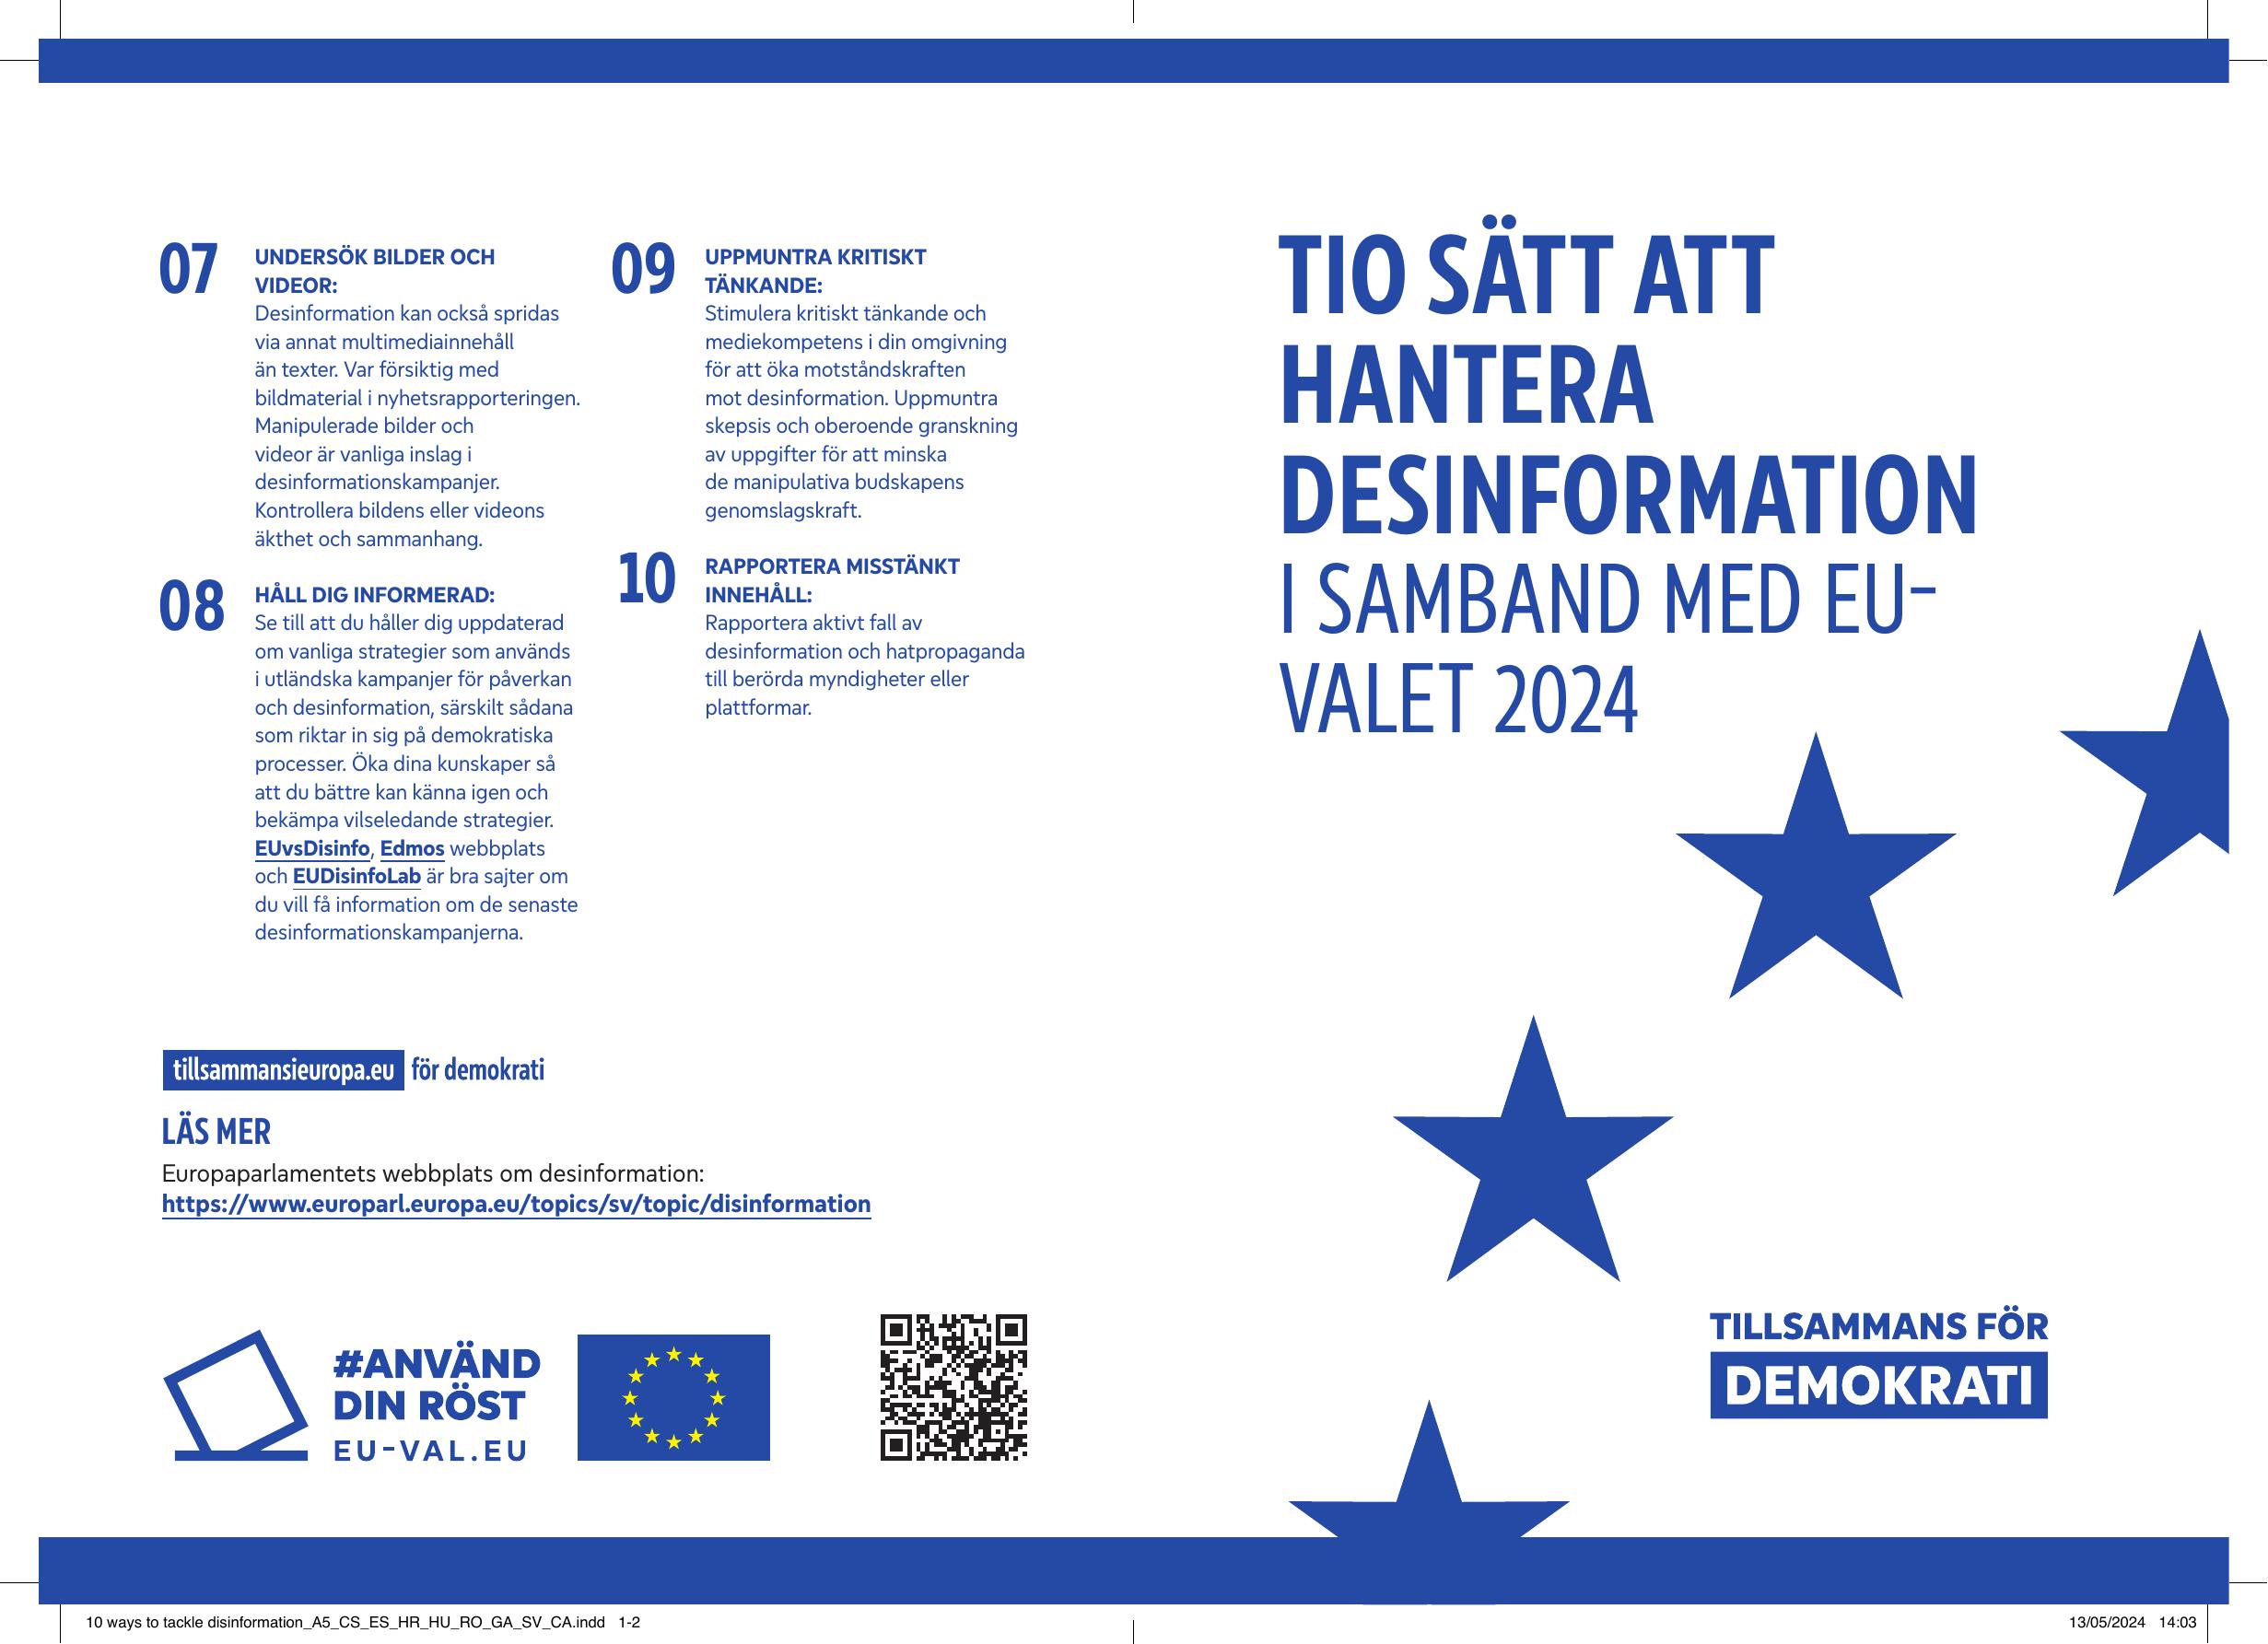 10 ways to tackle disinformation.pdf